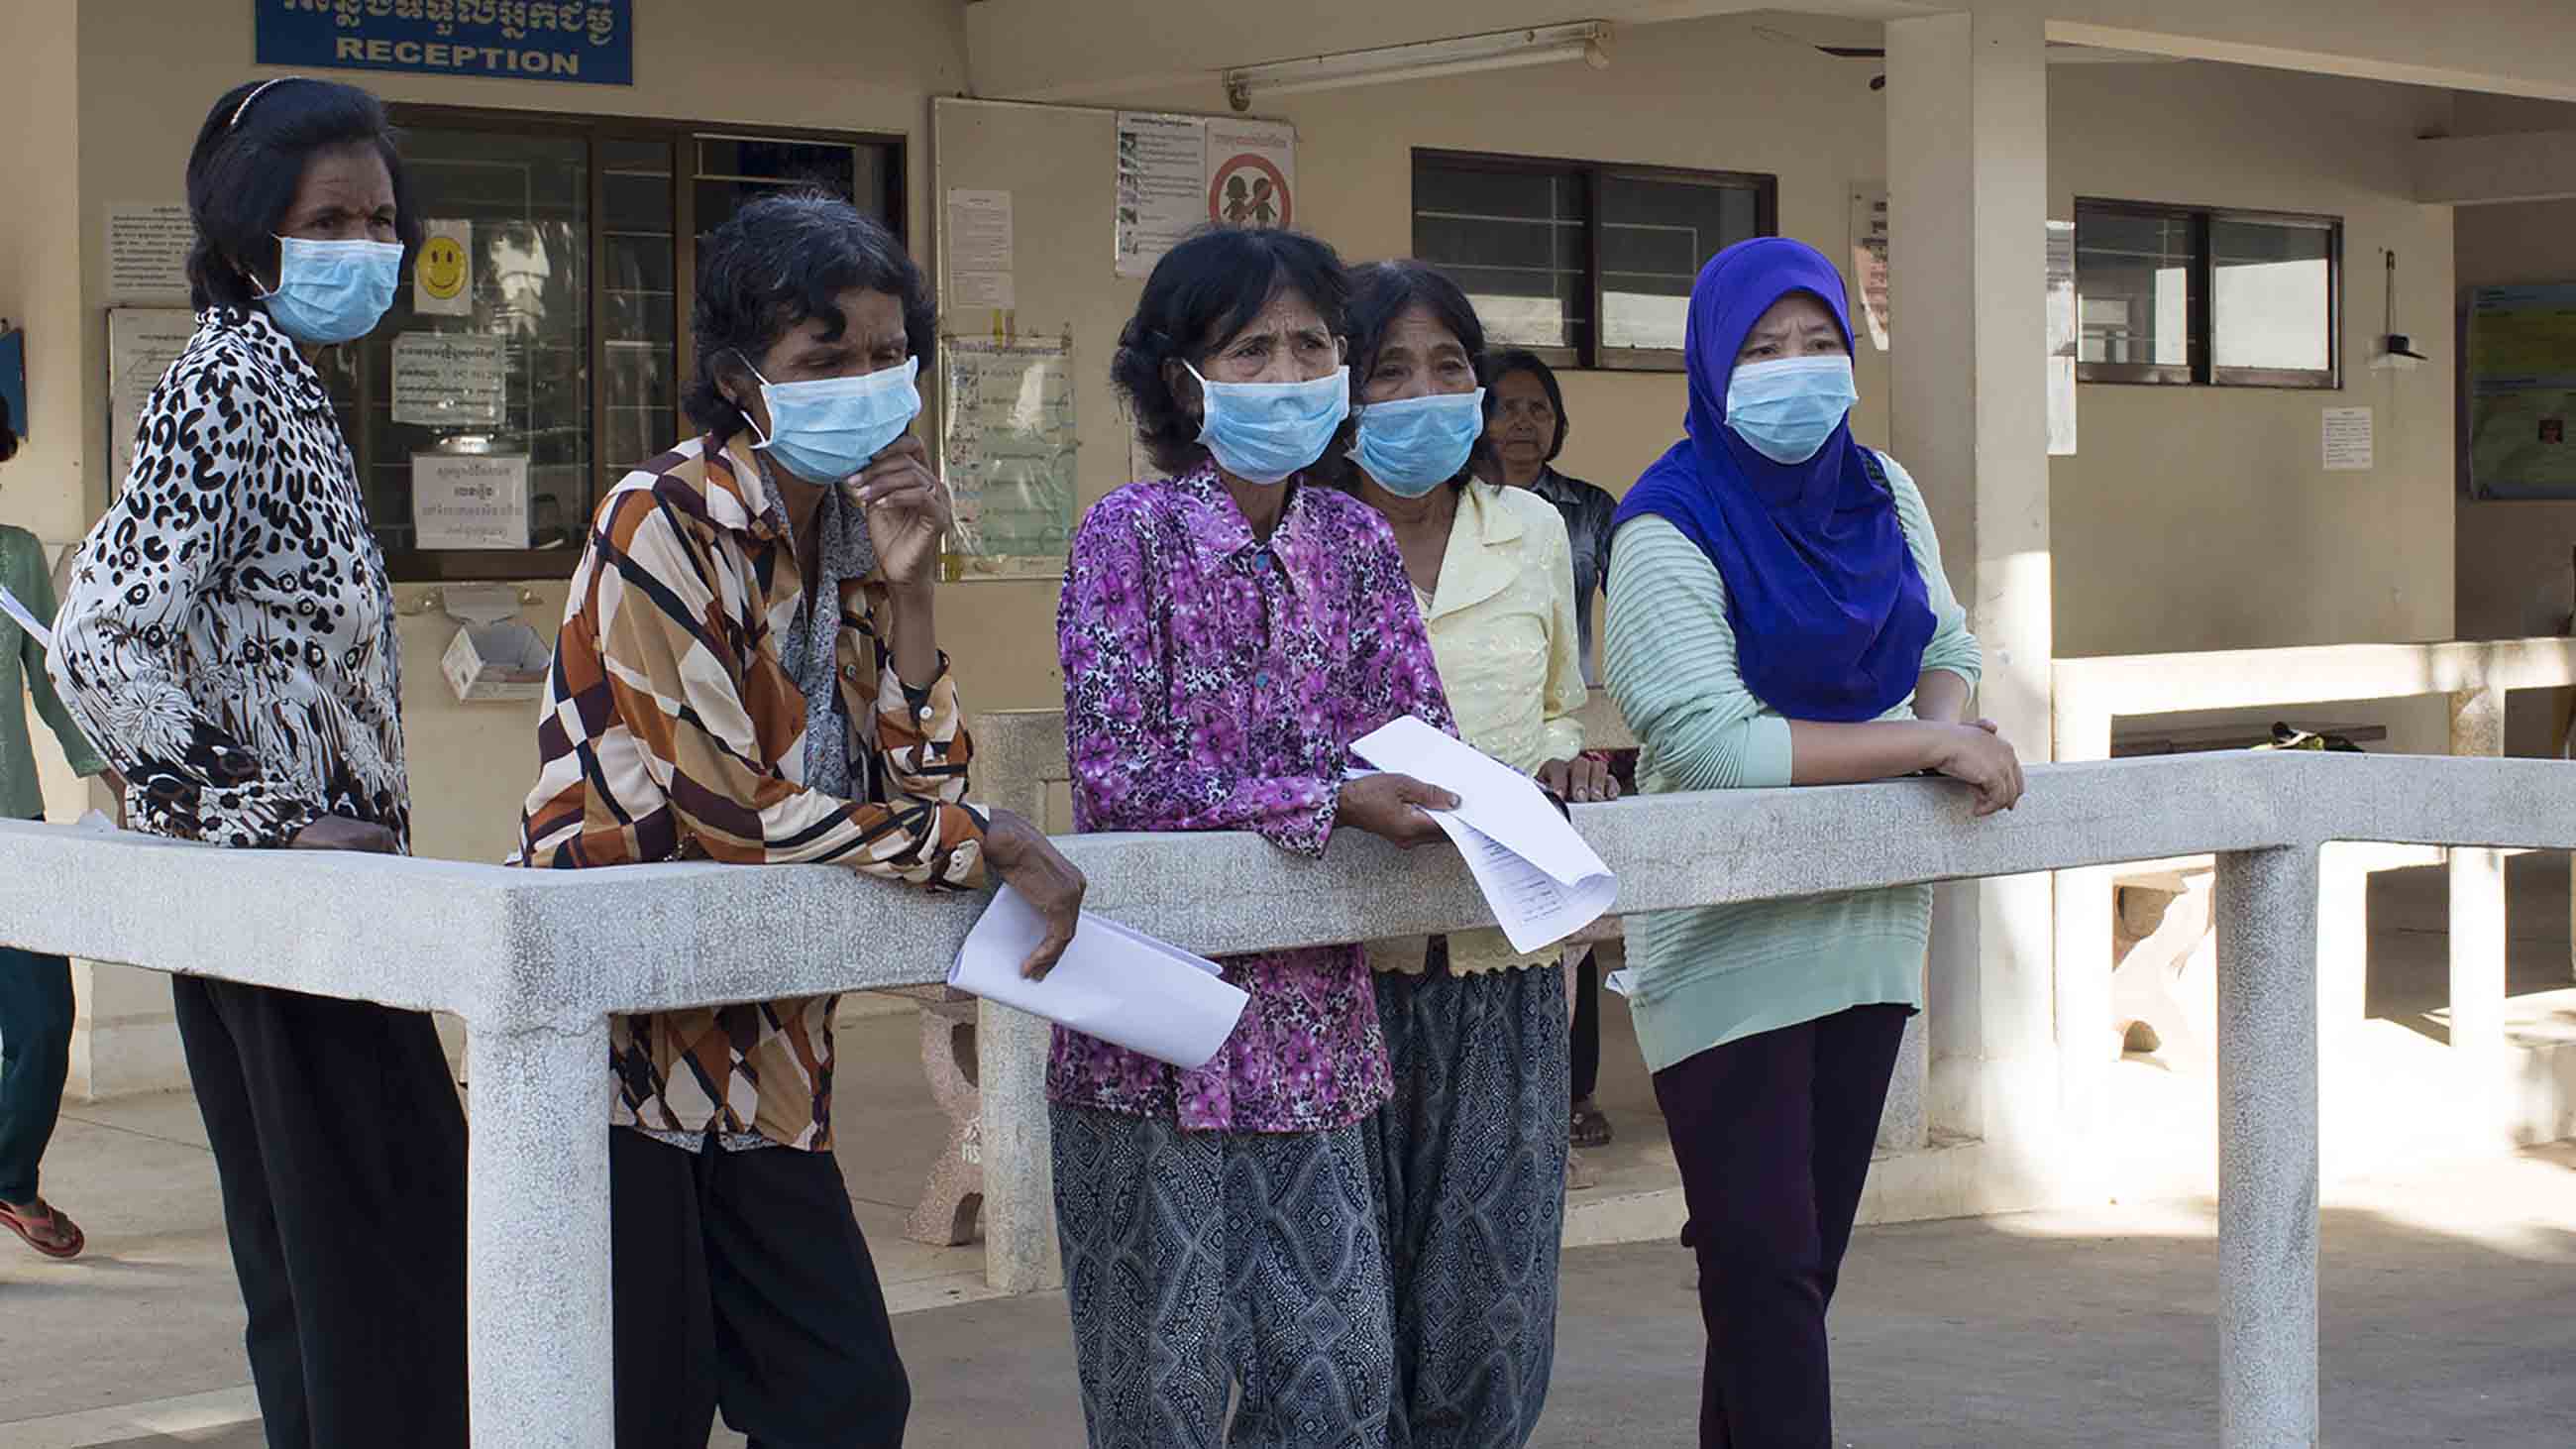 While we may think of drug resistance as a new emergency, at its heart lies an age-old disease: tuberculosis. TB patients wait outside Kampong Cham District Hospital in Cambodia.